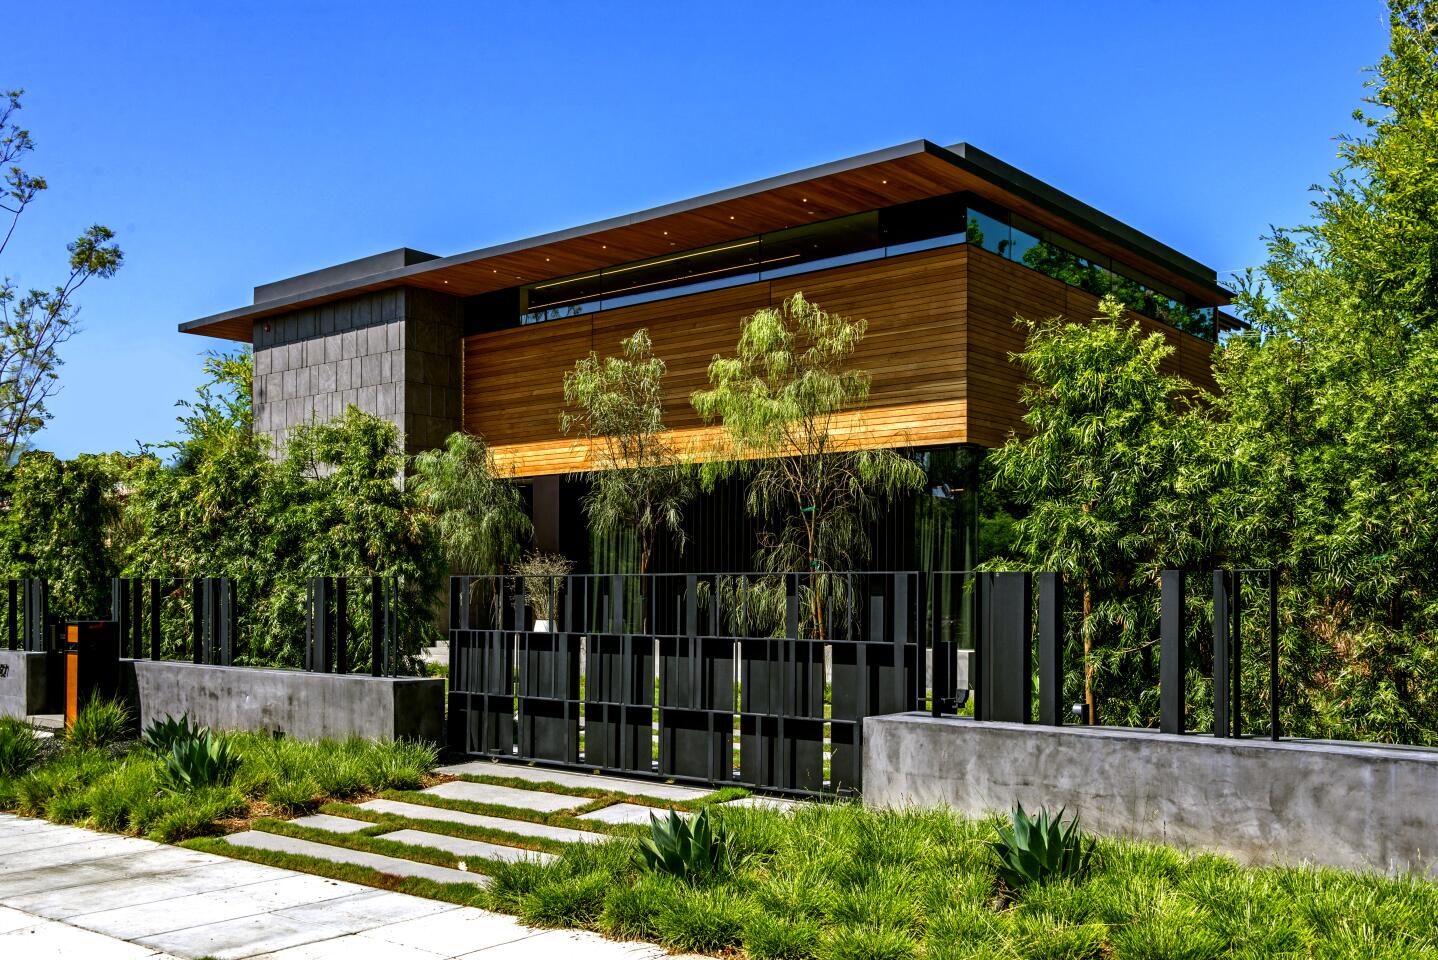 The 11,438-square-foot home, designed by Tag Front Architects, is visually striking from the street with its wood siding, stone accents and thin bands of clerestory windows. Walls of glass open the common areas to an infinity-edge swimming pool and spa. A detached guest house also lies in the backyard. Listed for $17.995 million, the modern residence has six bedrooms and 8.5 bathrooms including a master suite with an artistic fireplace feature. A floor-to-standing fireplace divides dual living rooms that make up the common area. A designer-done kitchen sits nearby.